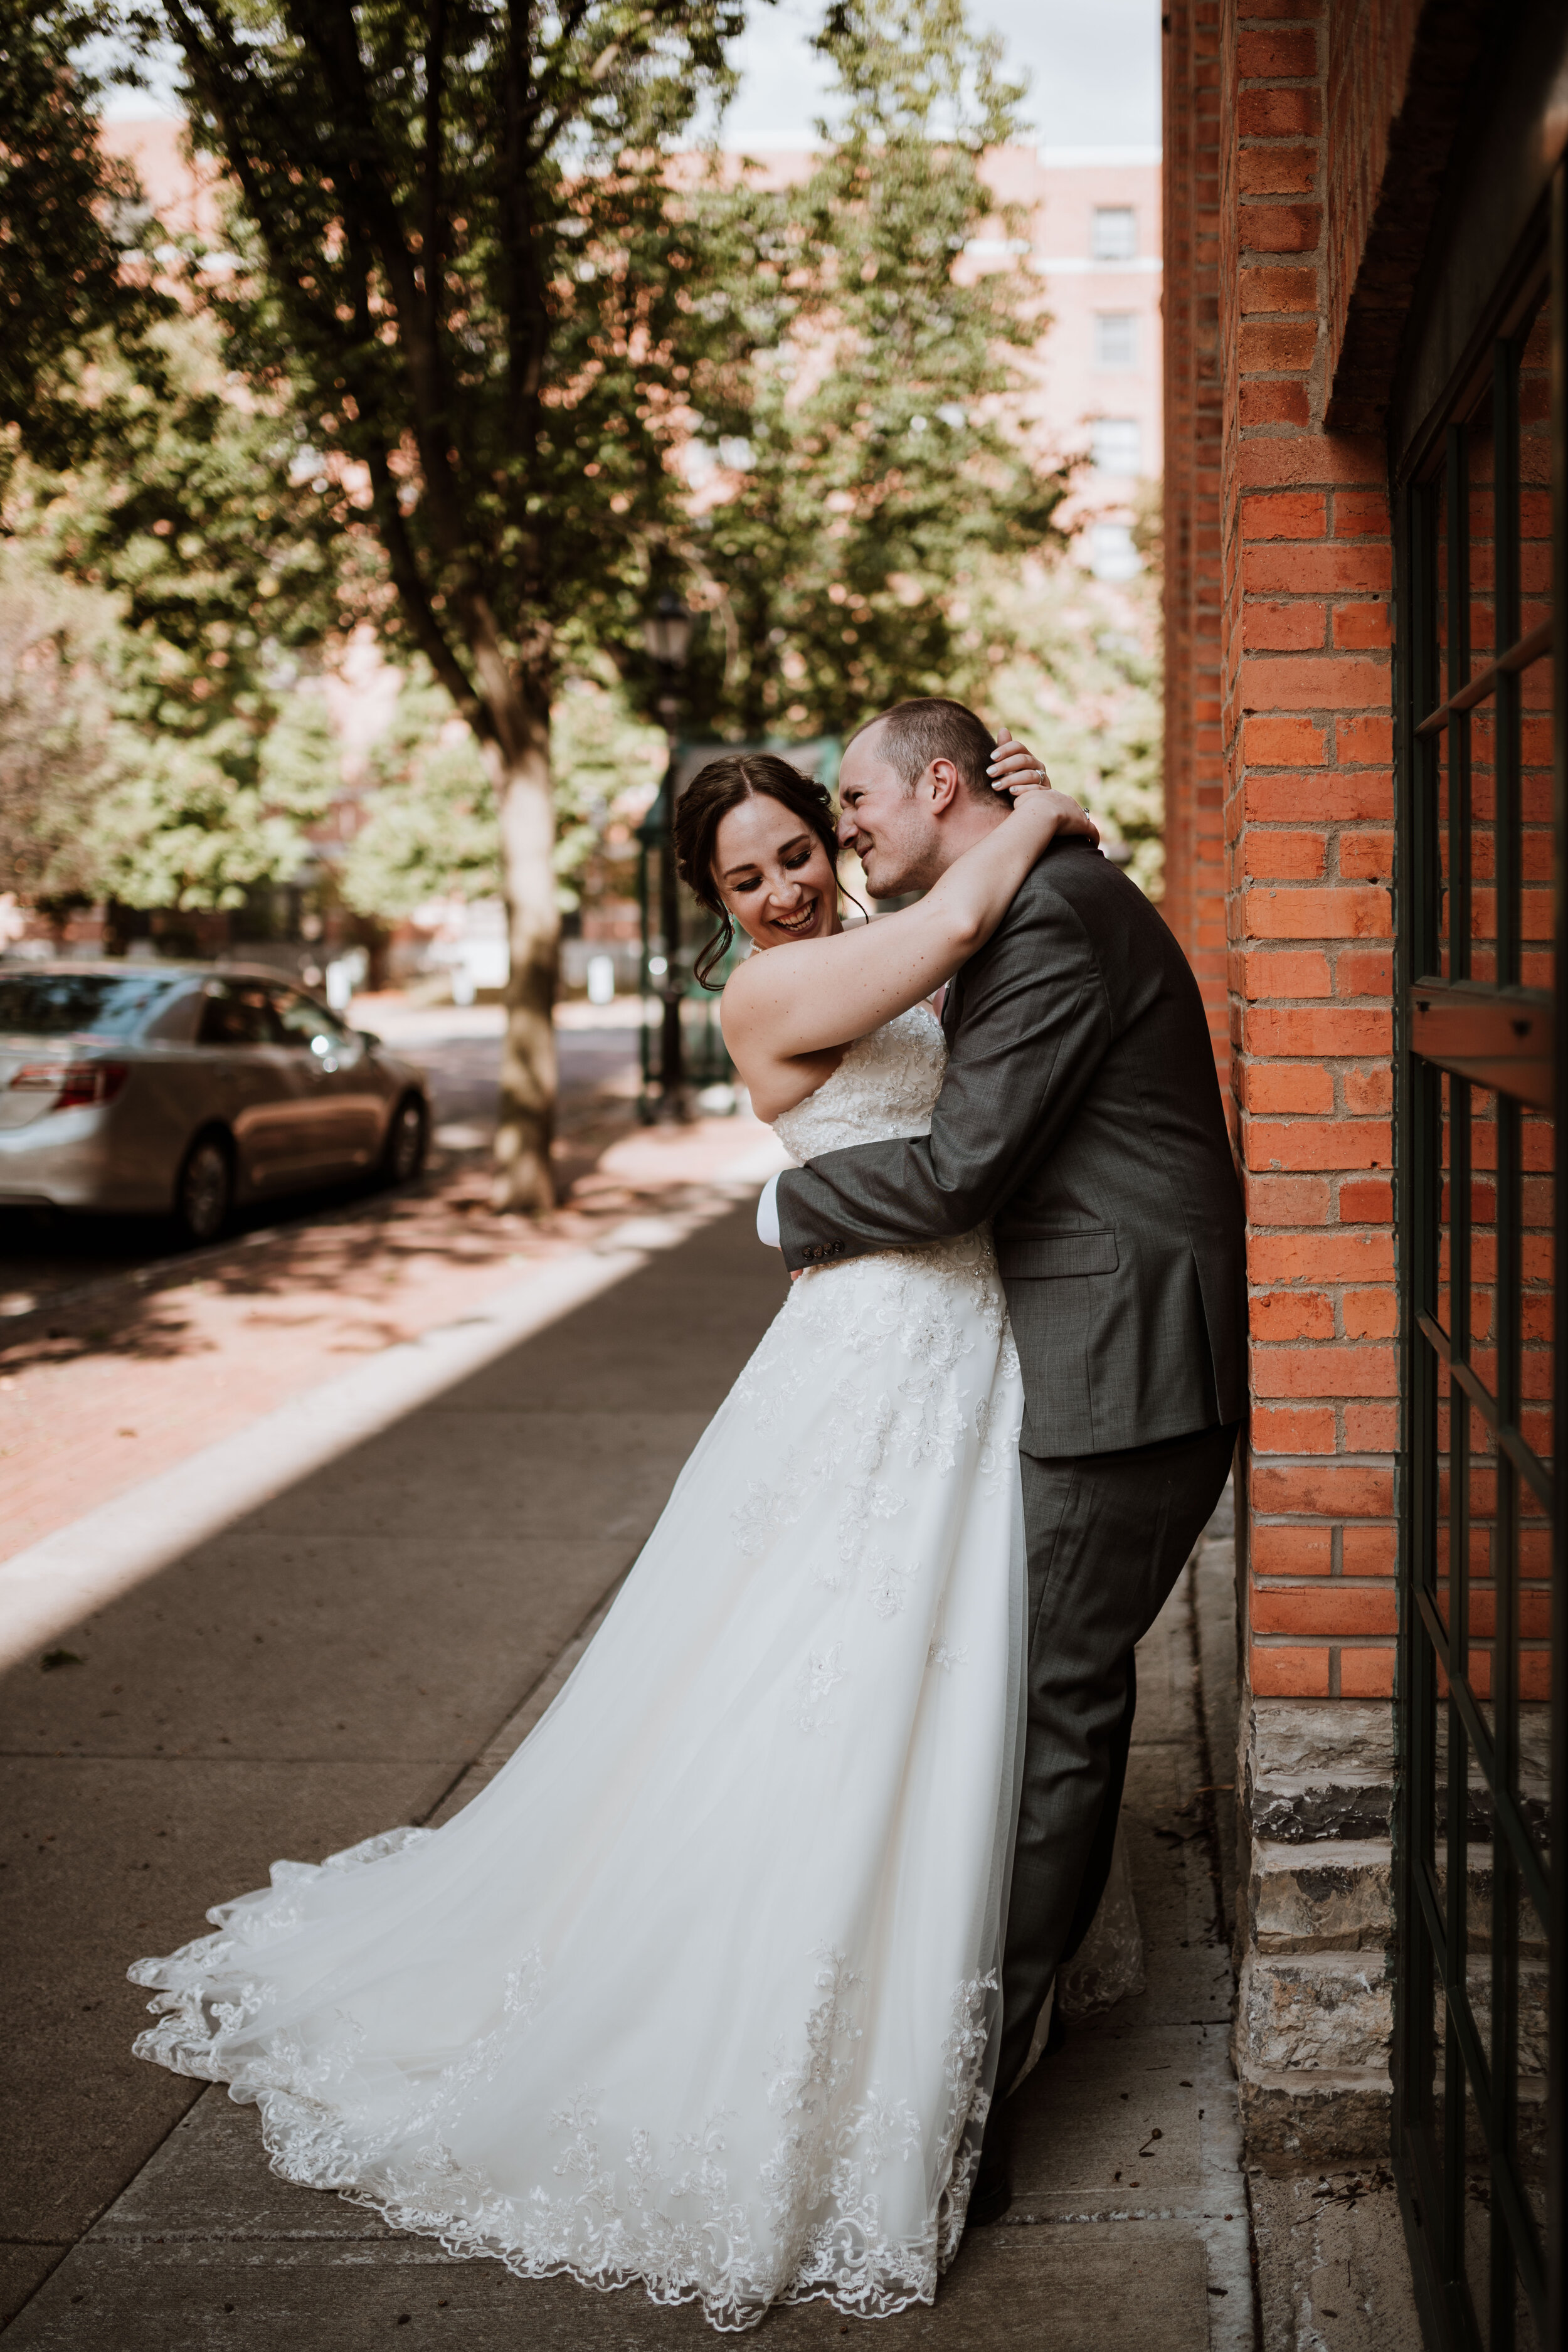 Newlywed couple embracing in a playful manner at their wedding in Syracuse, New York.